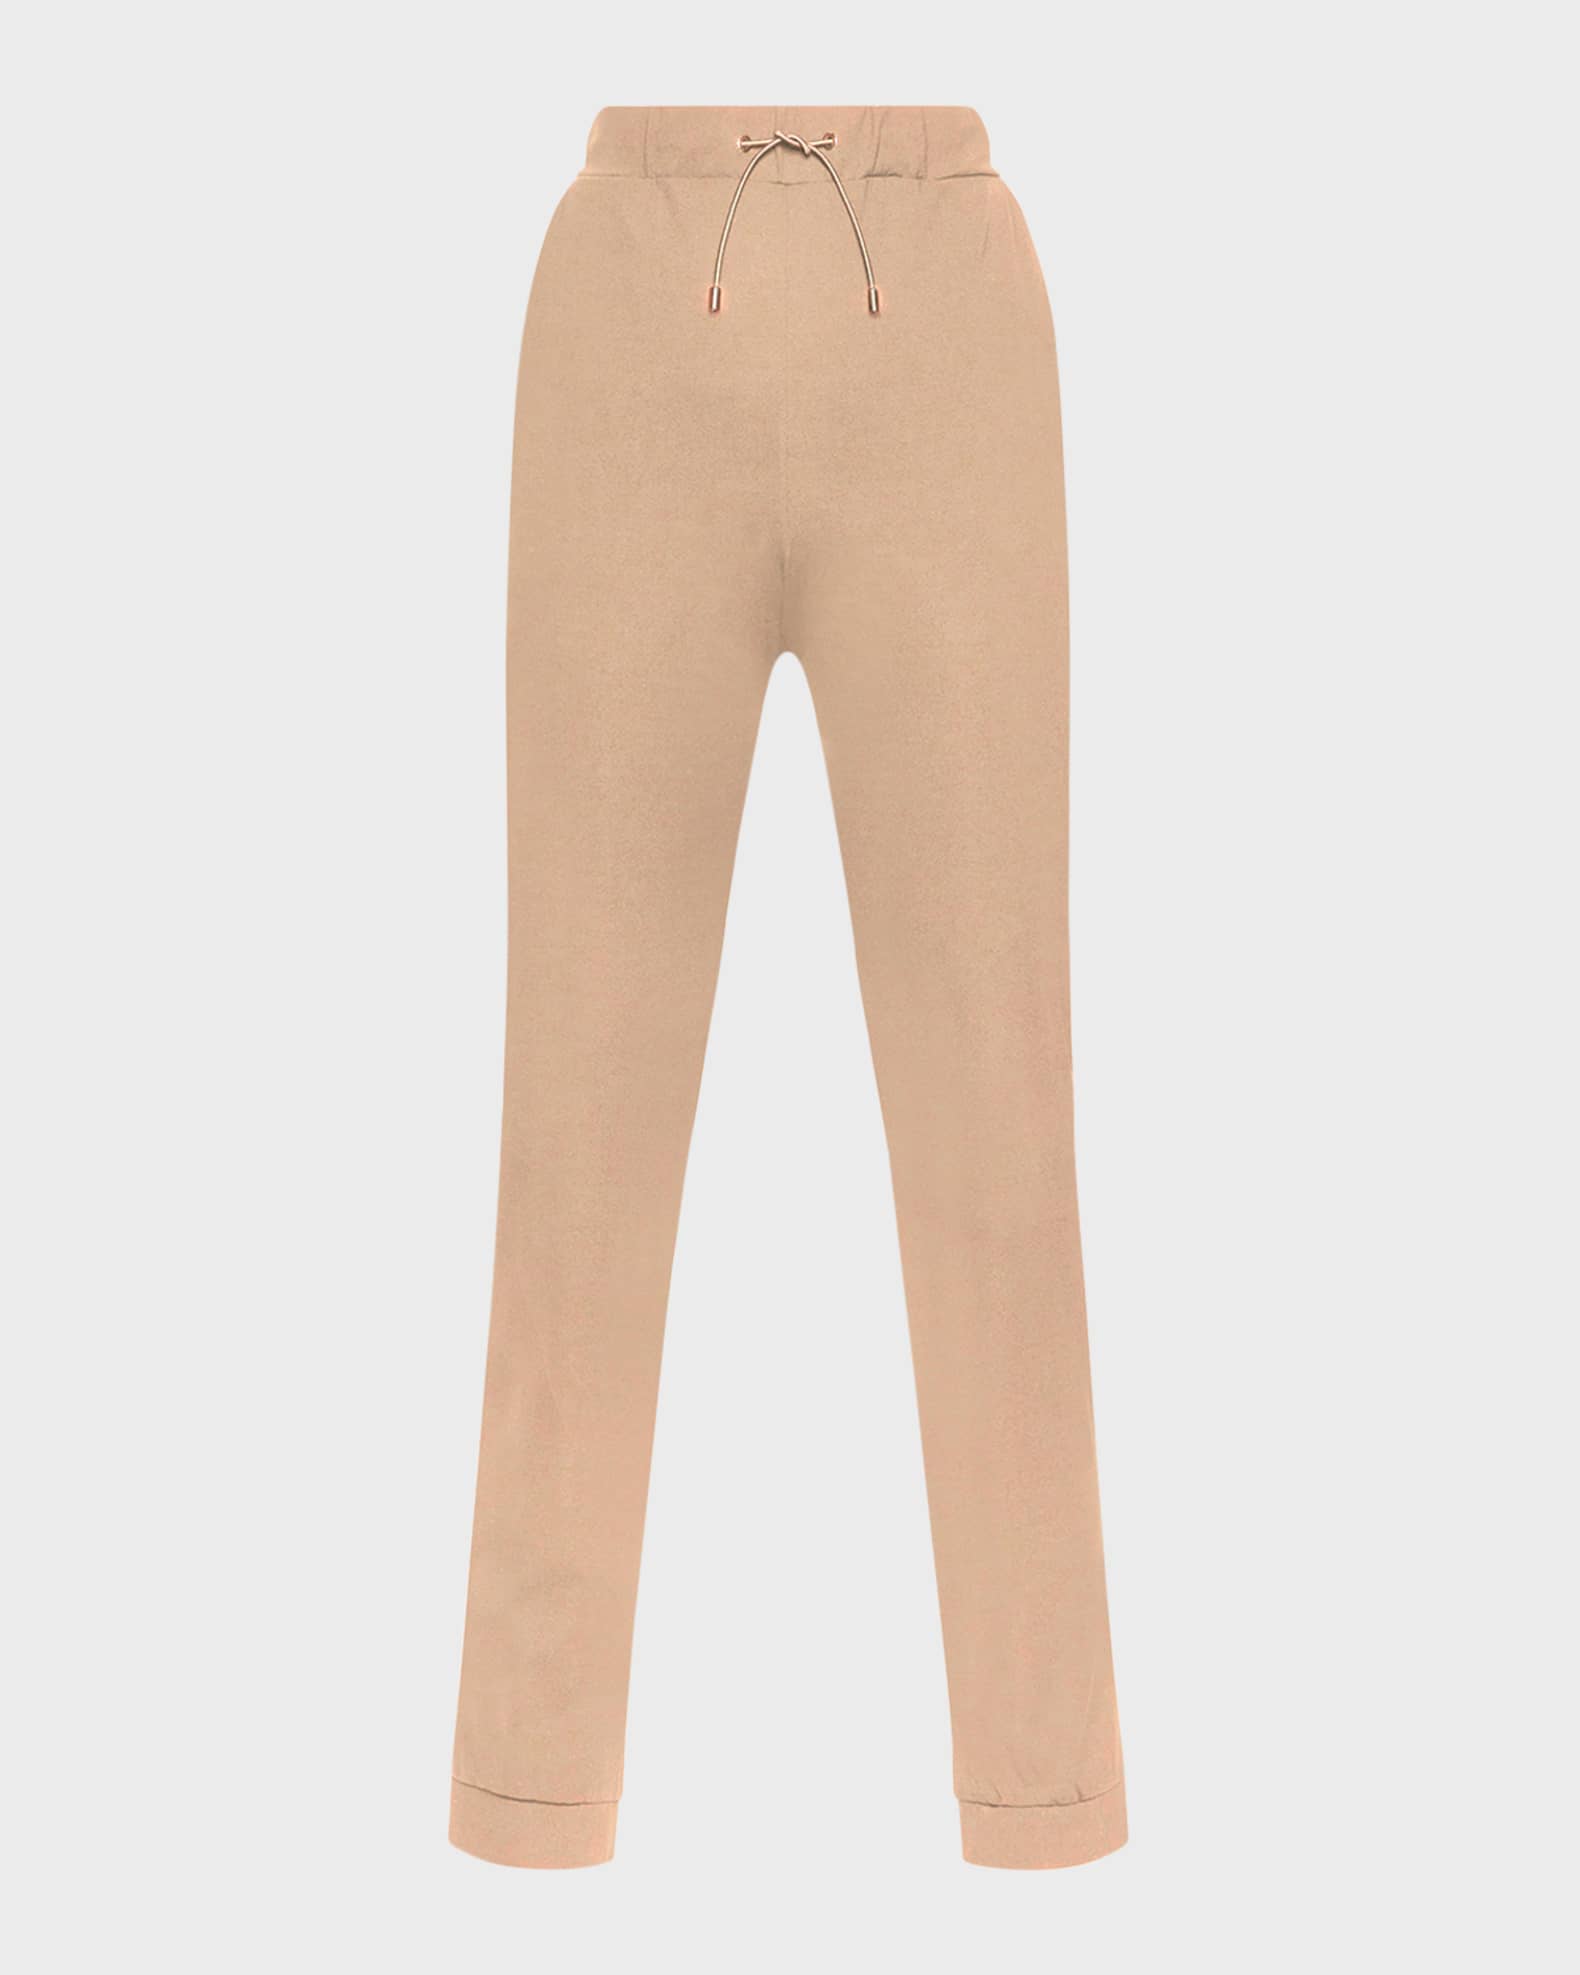 Wolford Warm Up Drawstring Pants | Neiman Marcus